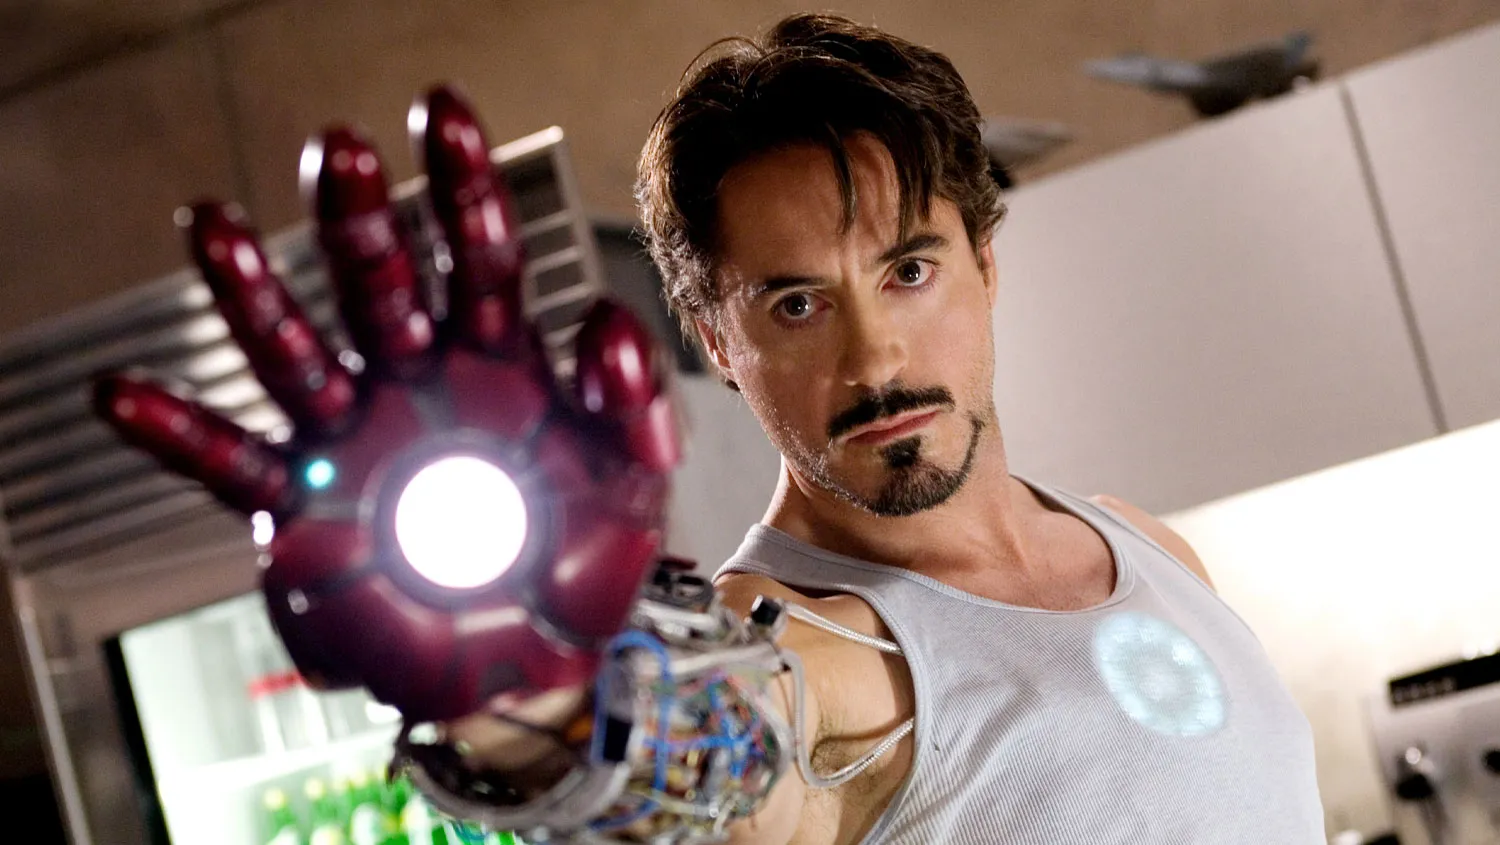 Will Iron Man Ever Come Back? Kevin Feige's Big Hint on Marvel's Future Plans